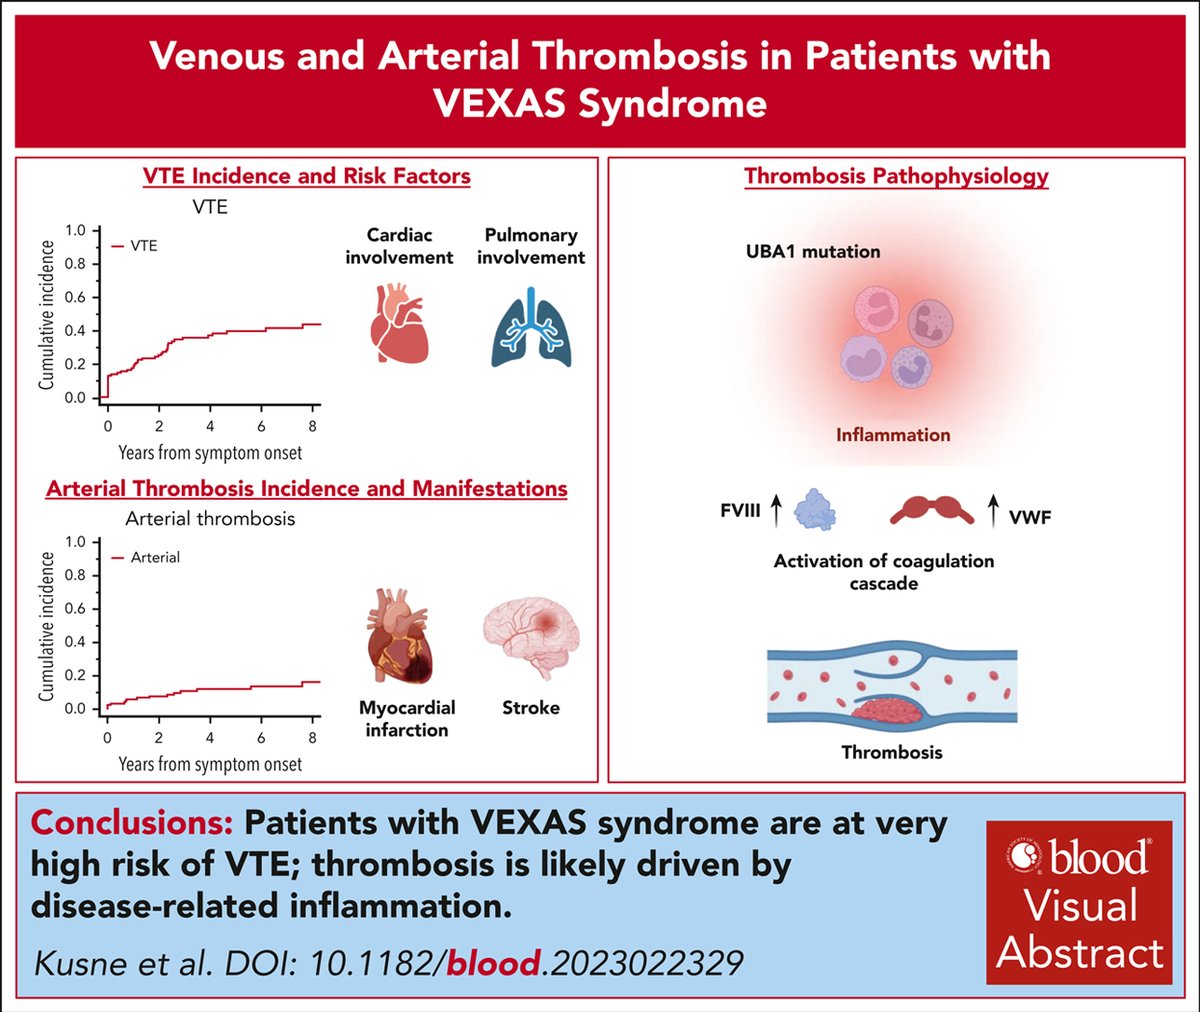 VTE is common in VEXAS syndrome, occurring in over 40% of patients with frequent recurrences; however, it is not associated with increased mortality. ow.ly/XXtA50RTHYF #thrombosisandhemostasis #clinicaltrialsandobservations #hematopoiesisandstemcells